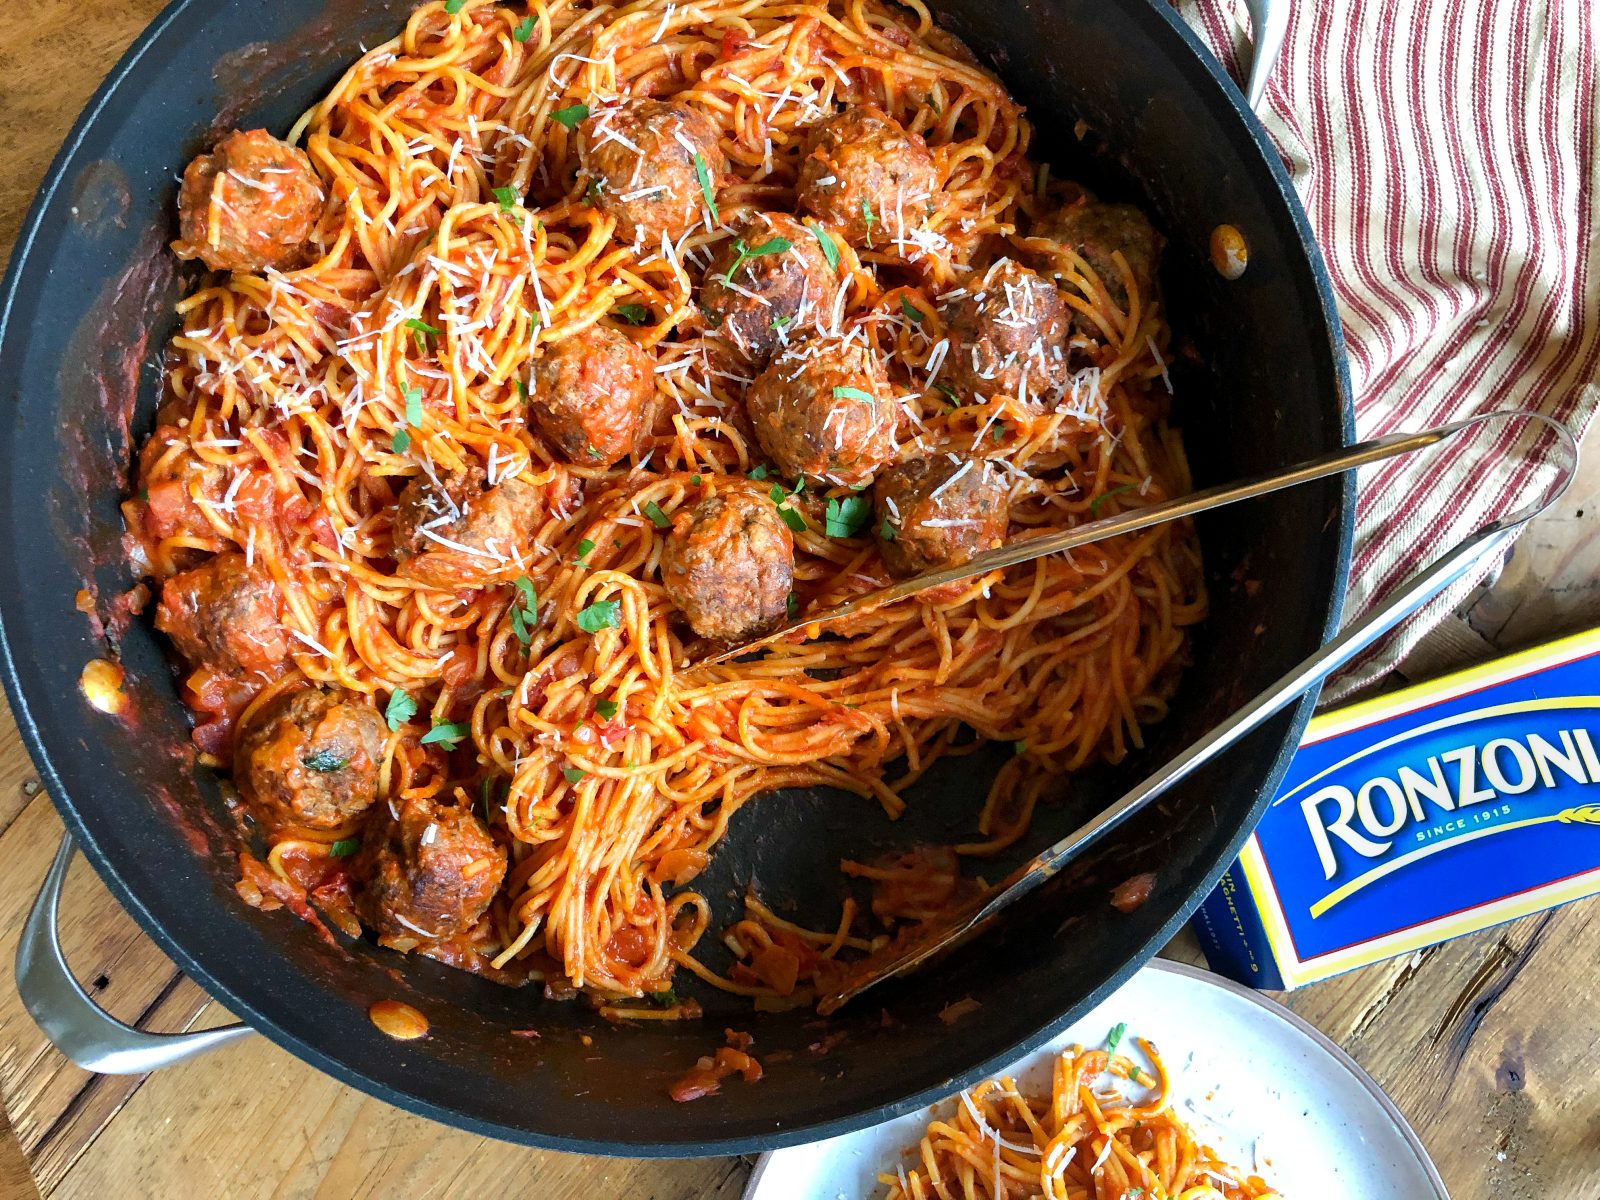 One-Pot Thin Spaghetti And Meatballs - Amazing Recipe To Go With The Ronzoni BOGO Sale! on I Heart Publix